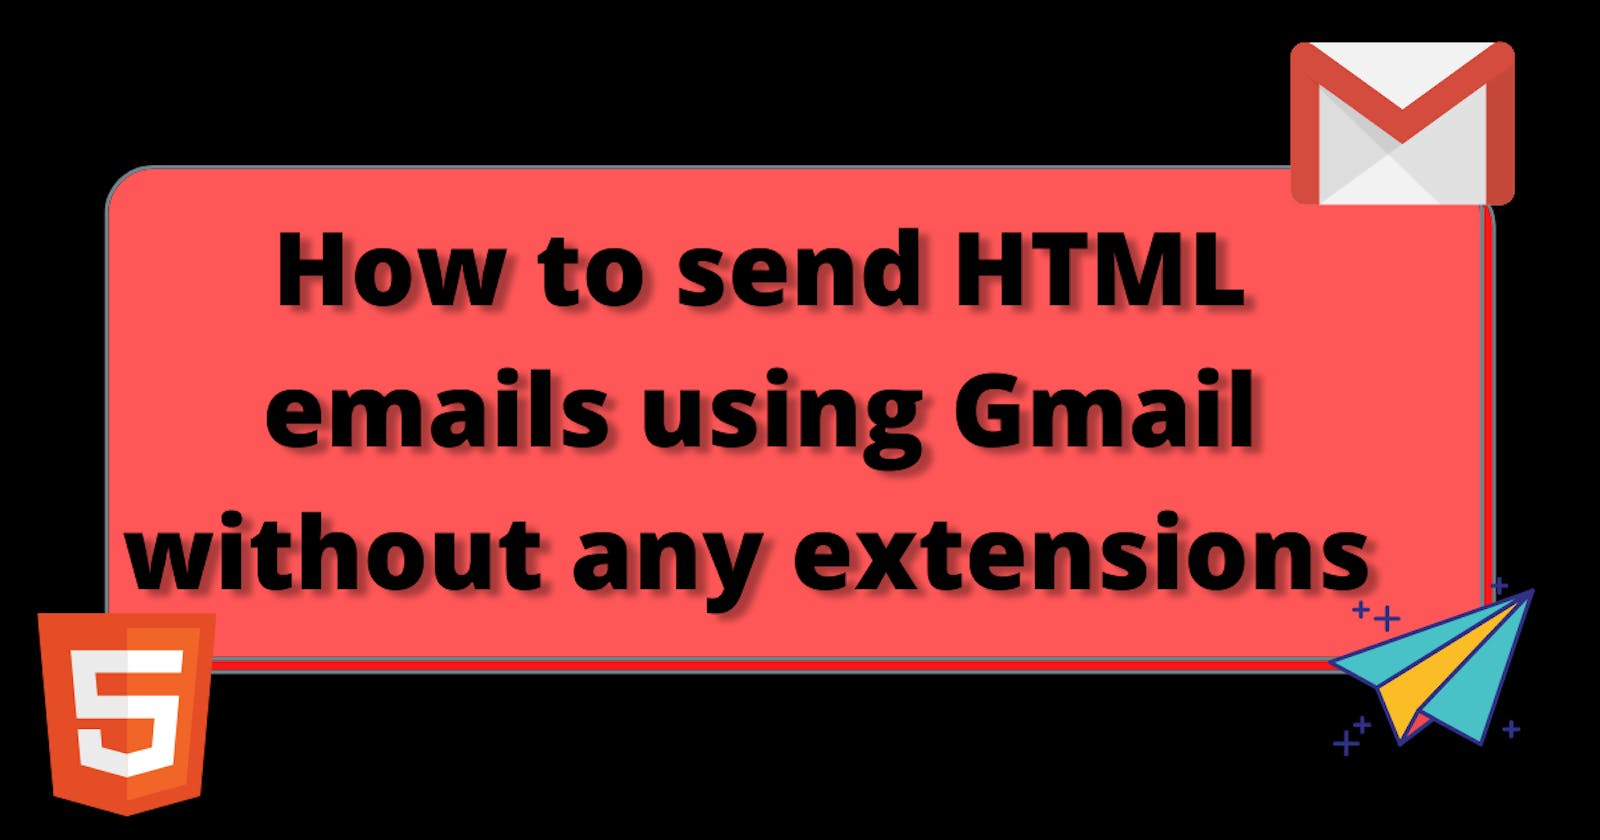 How to send HTML emails using Gmail without any extensions 🤔